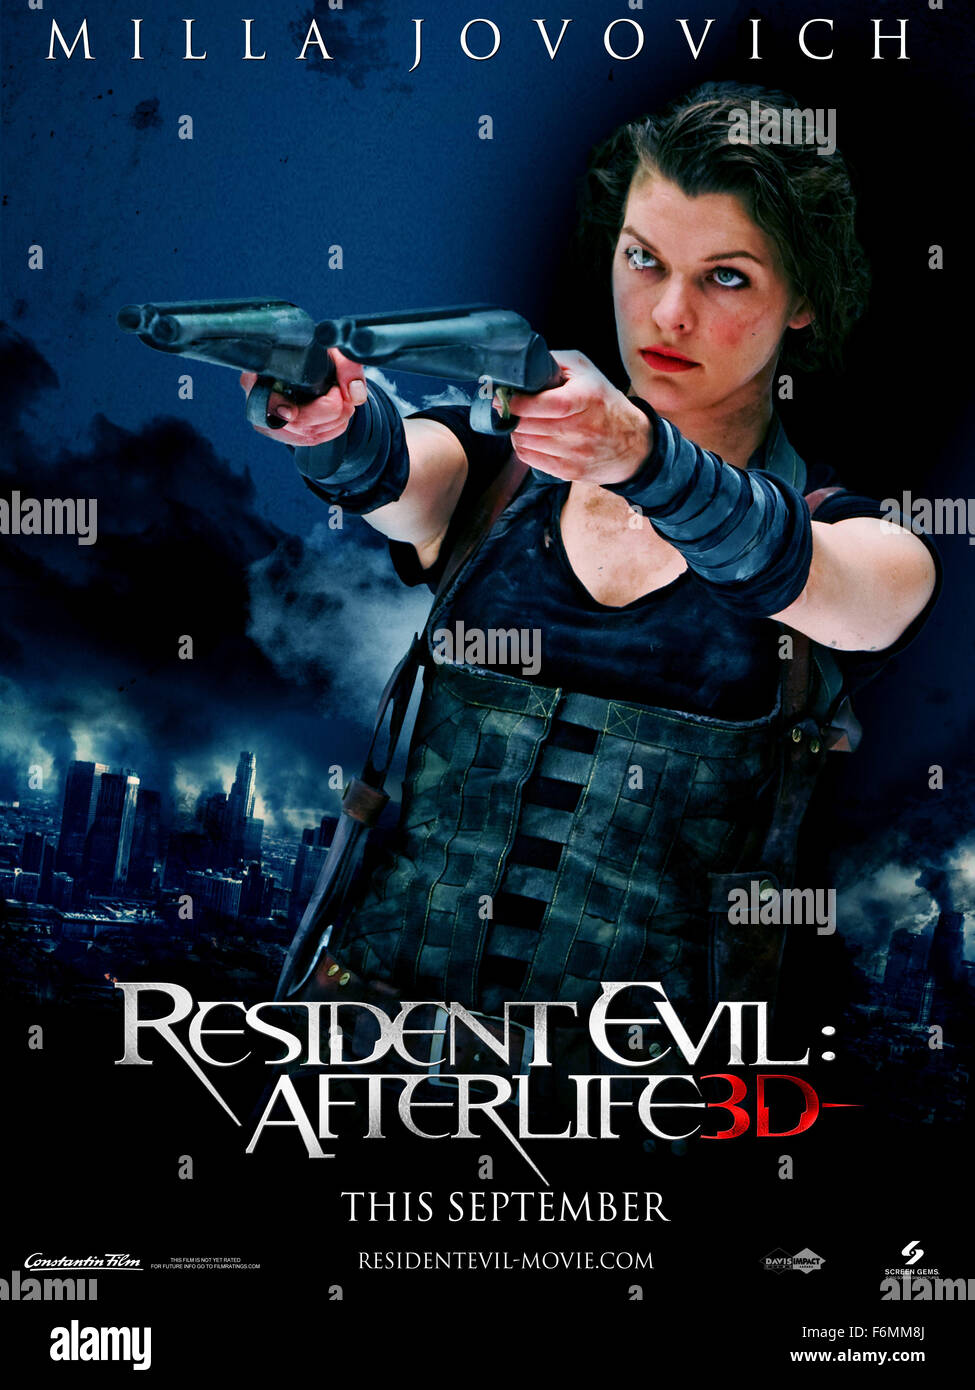 RELEASE DATE: September 10, 2010. MOVIE TITLE: Resident Evil Afterlife.  STUDIO: Impact Pictures. PLOT: In a world ravaged by a virus infection,  turning its victims into the Undead, Alice (Jovovich), continues on